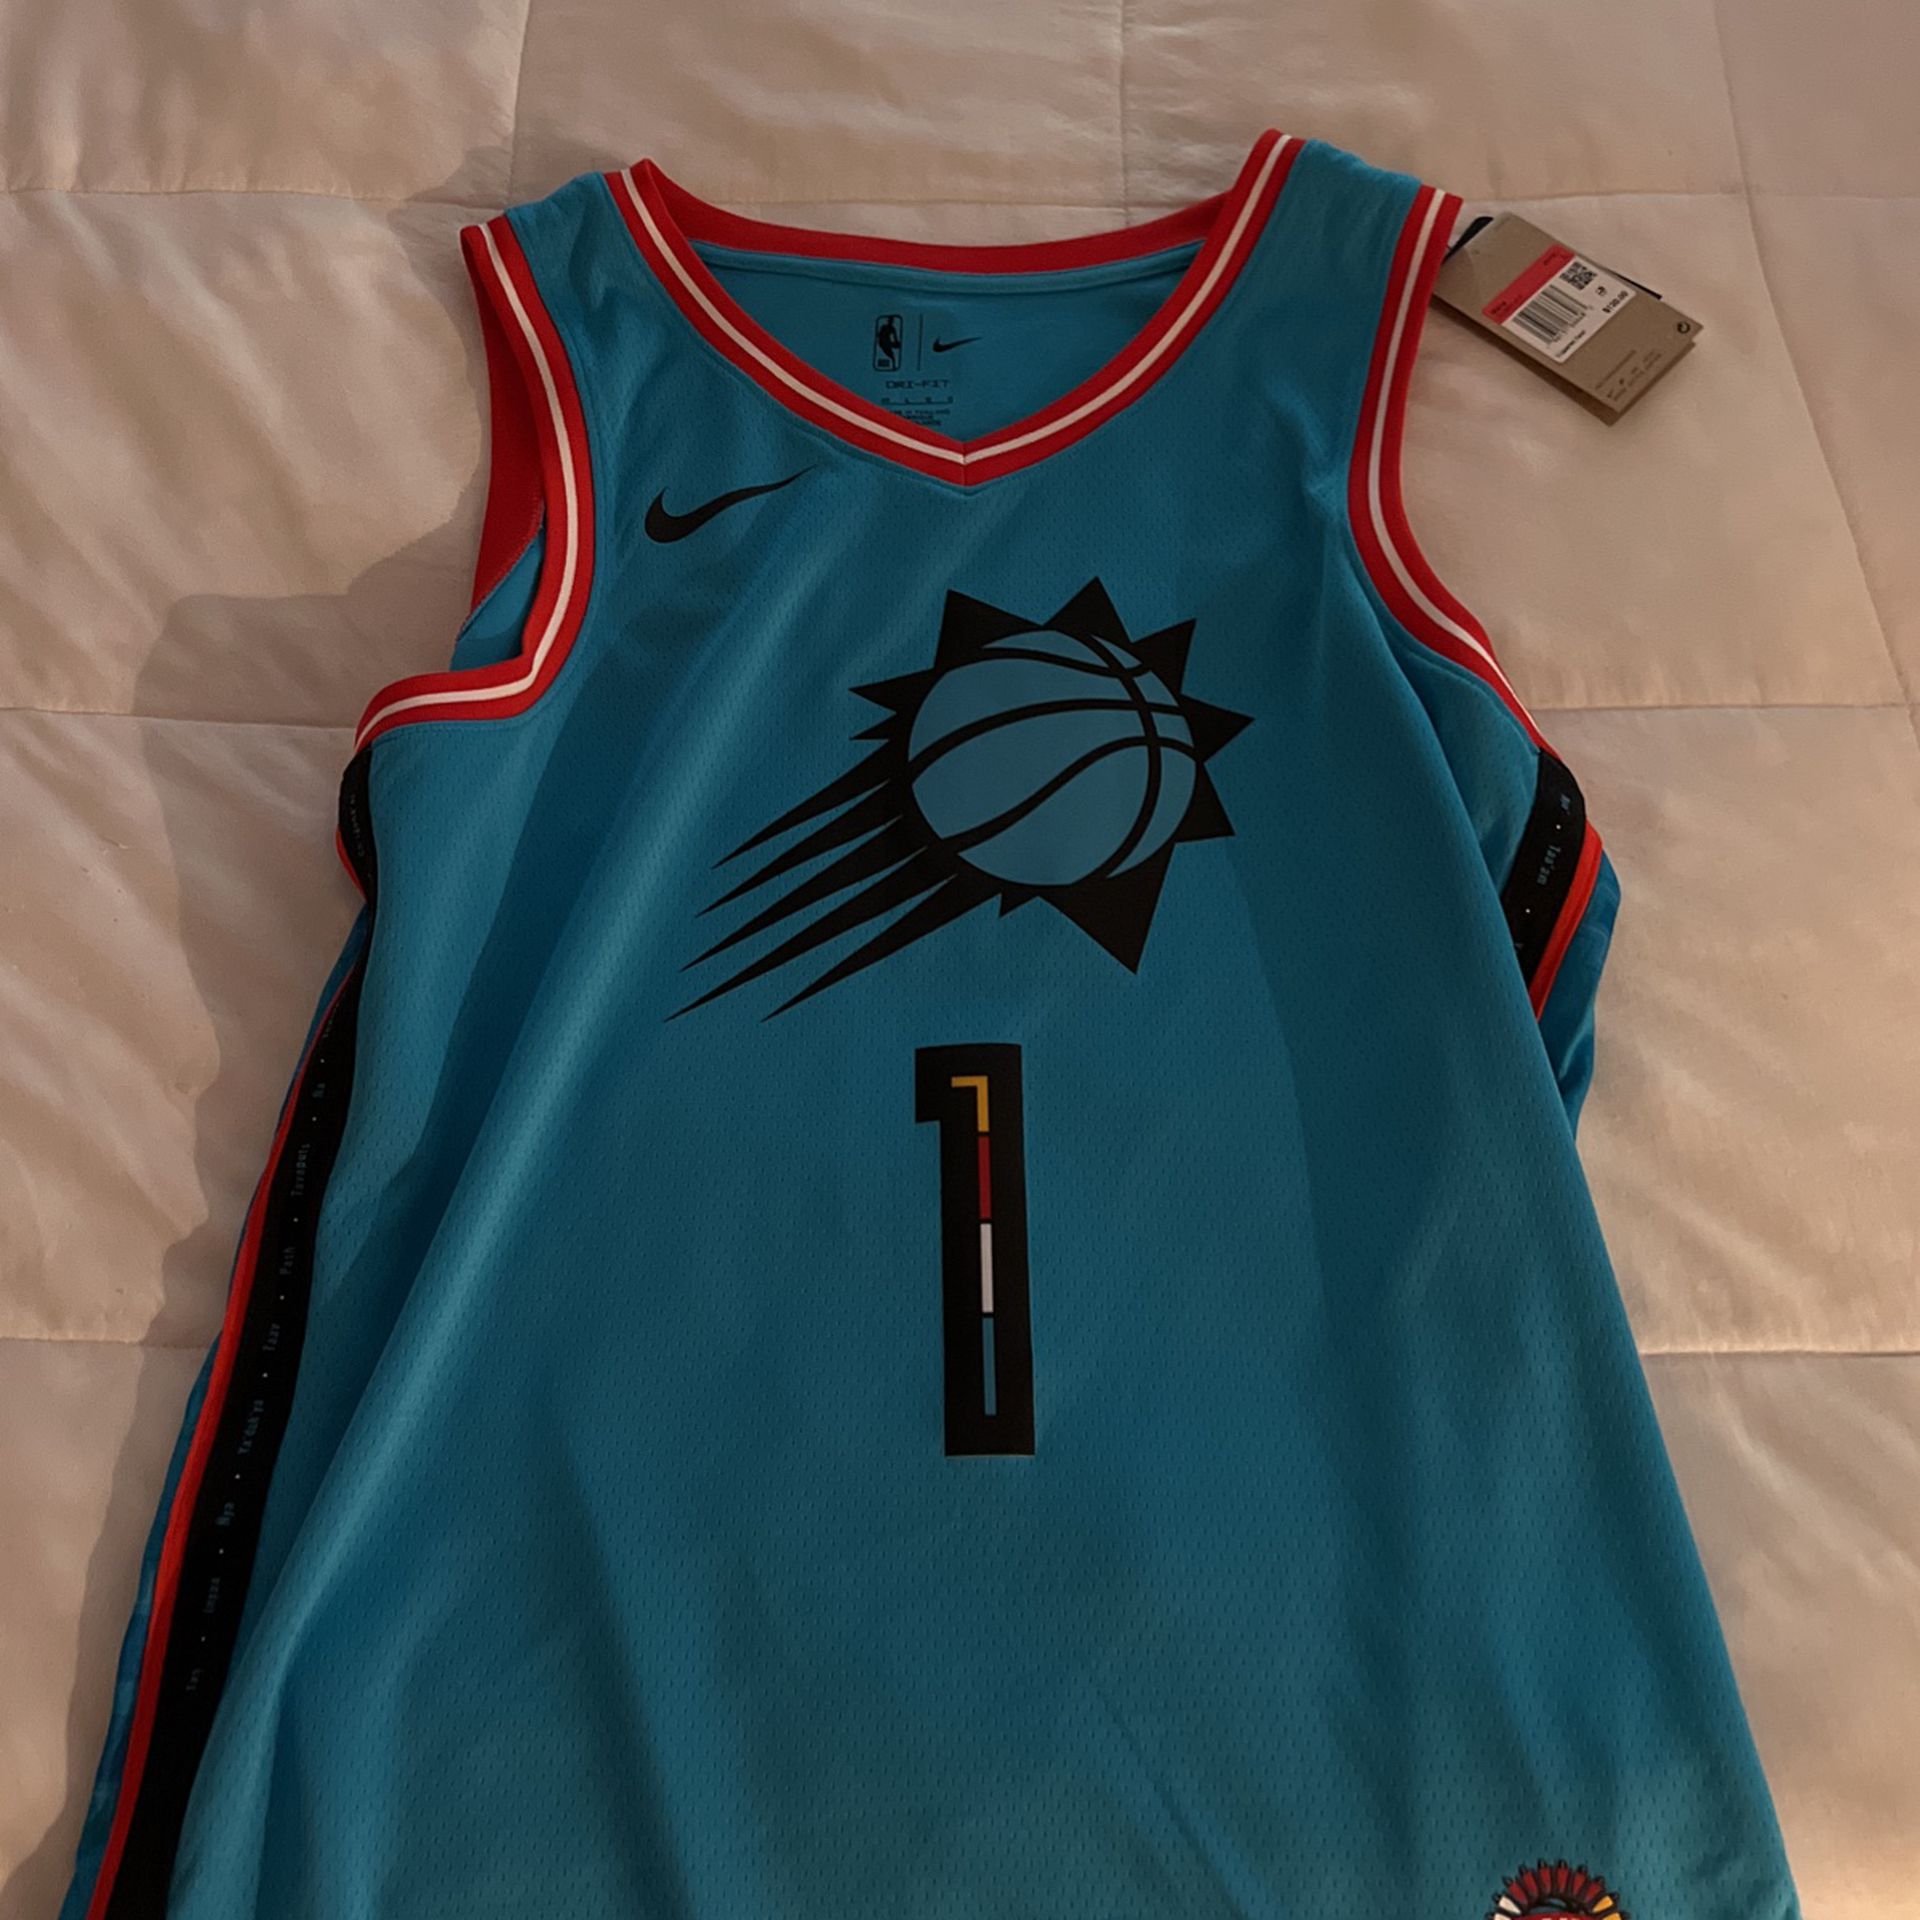 Authentic Brand New Devin Booker Jersey for Sale in Henderson, NV - OfferUp